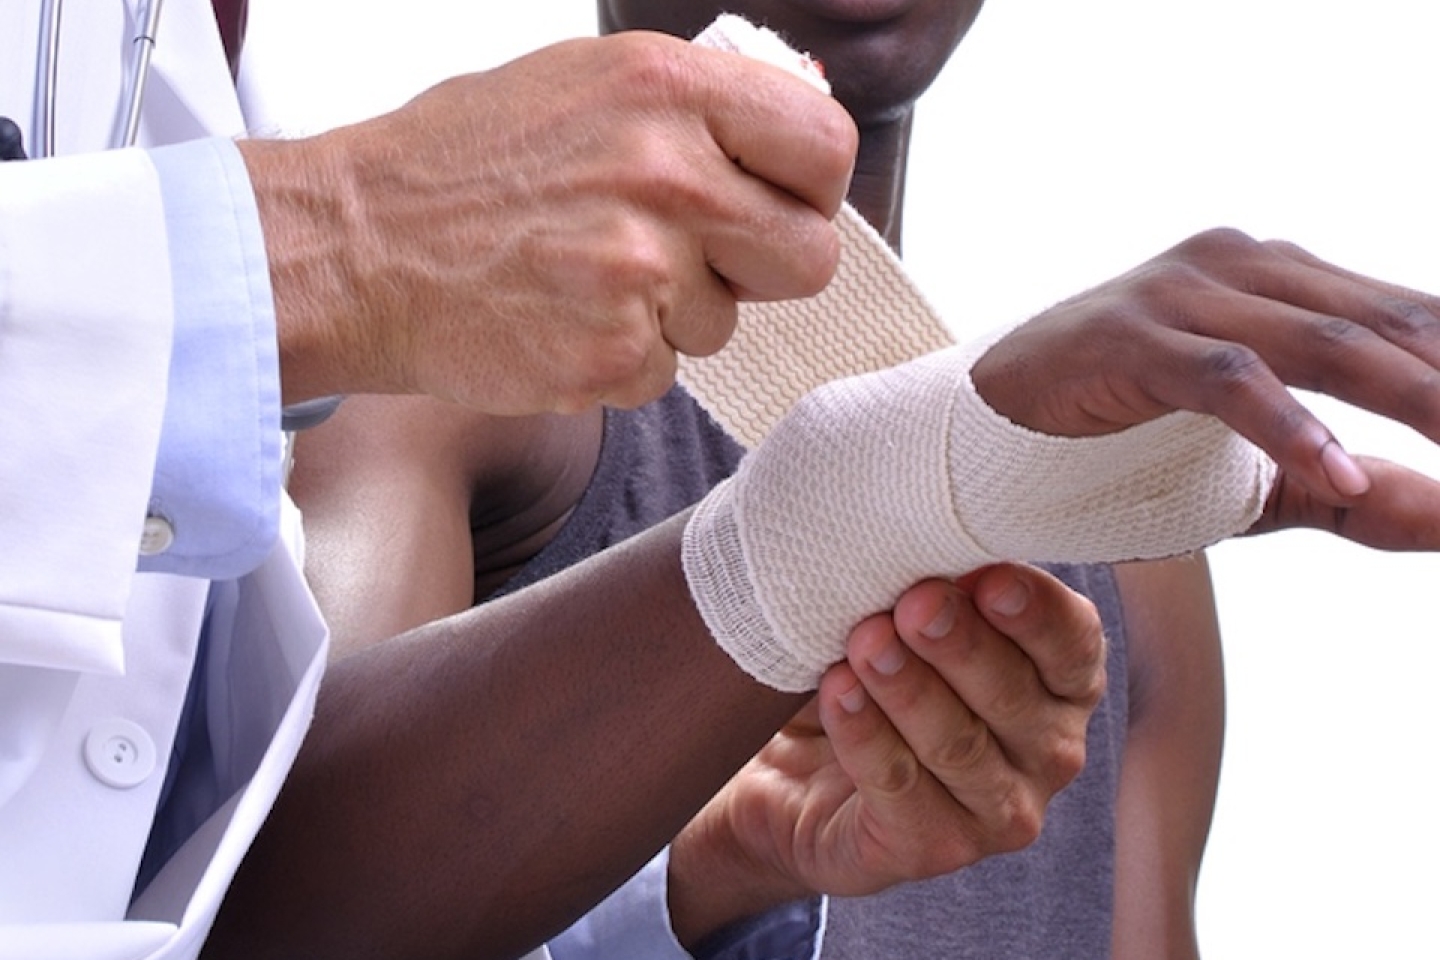 Male medical doctor wraps injured wrist of male patient with a sports bandage on white background